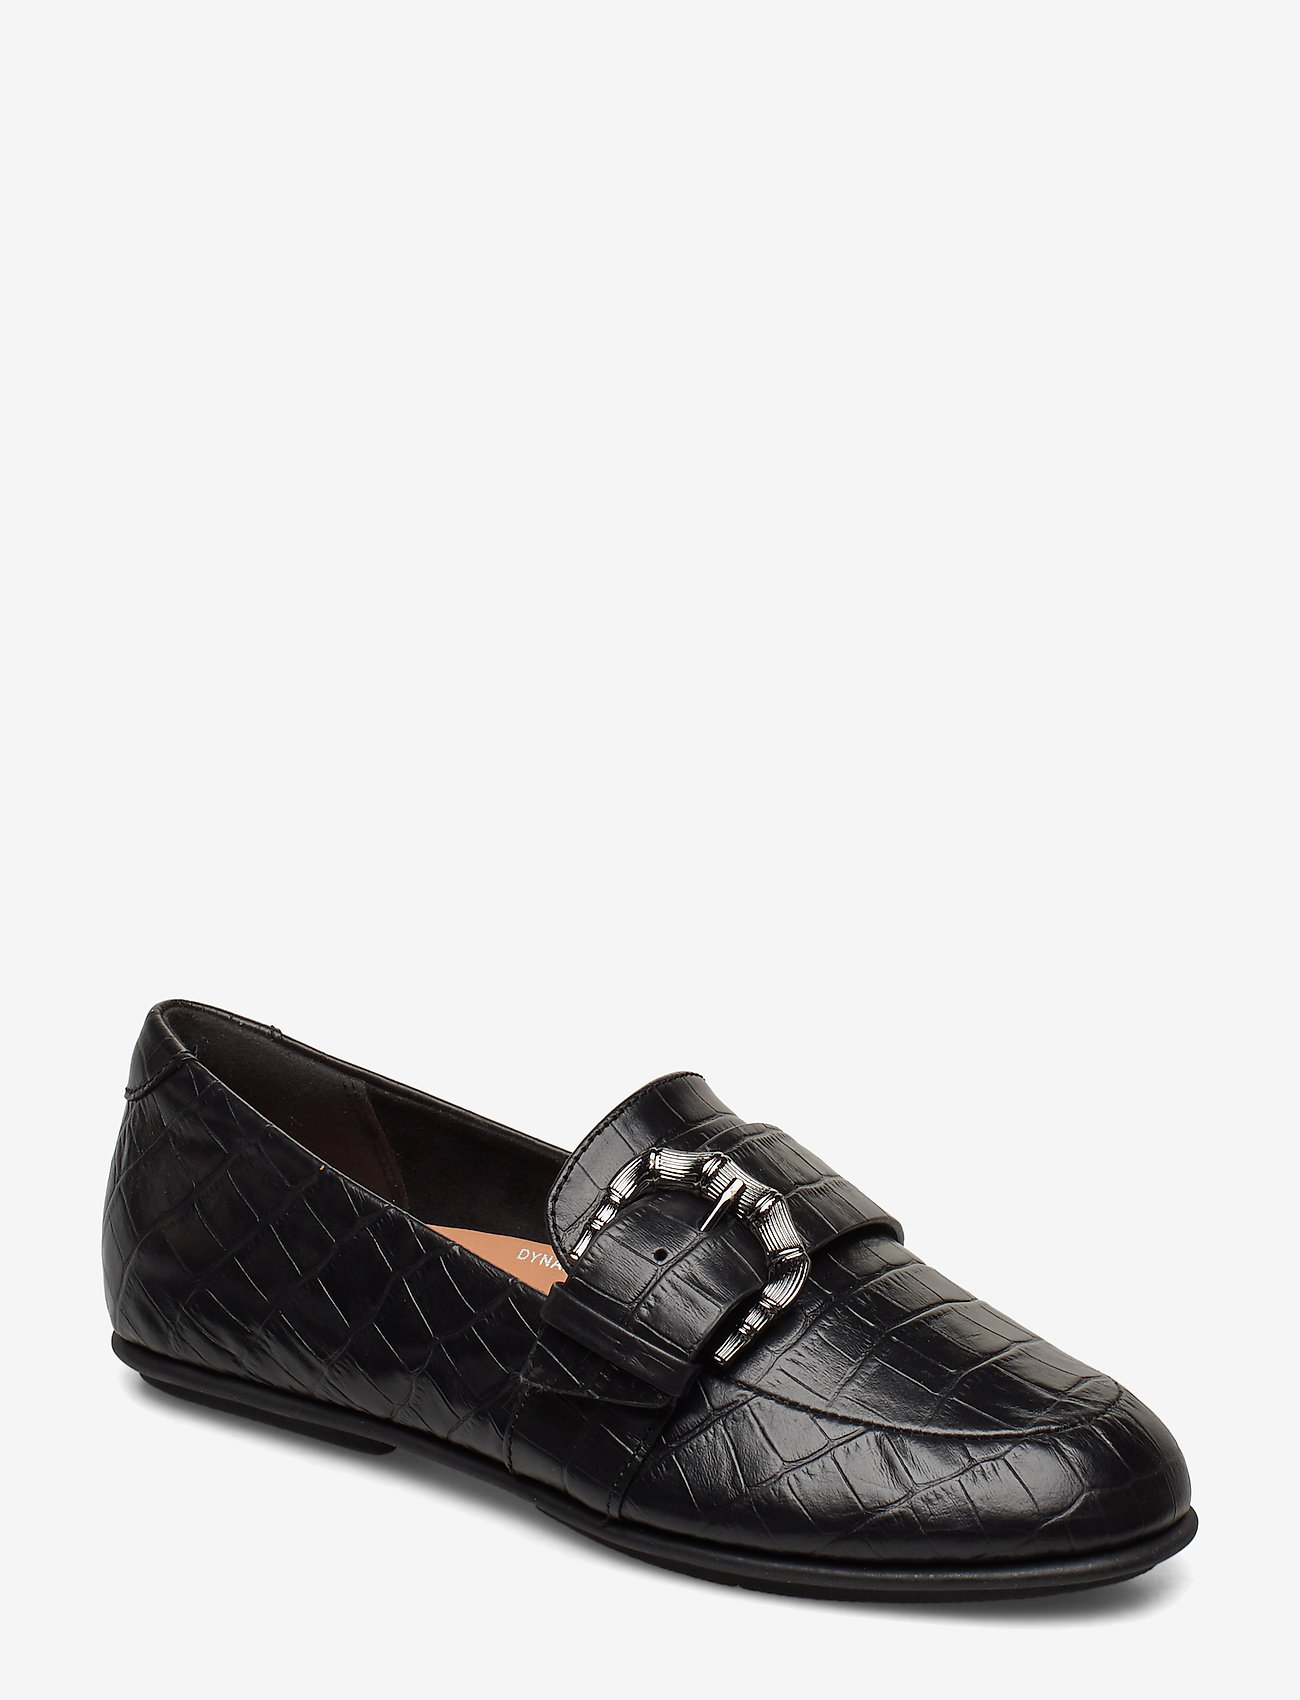 fitflop loafers black